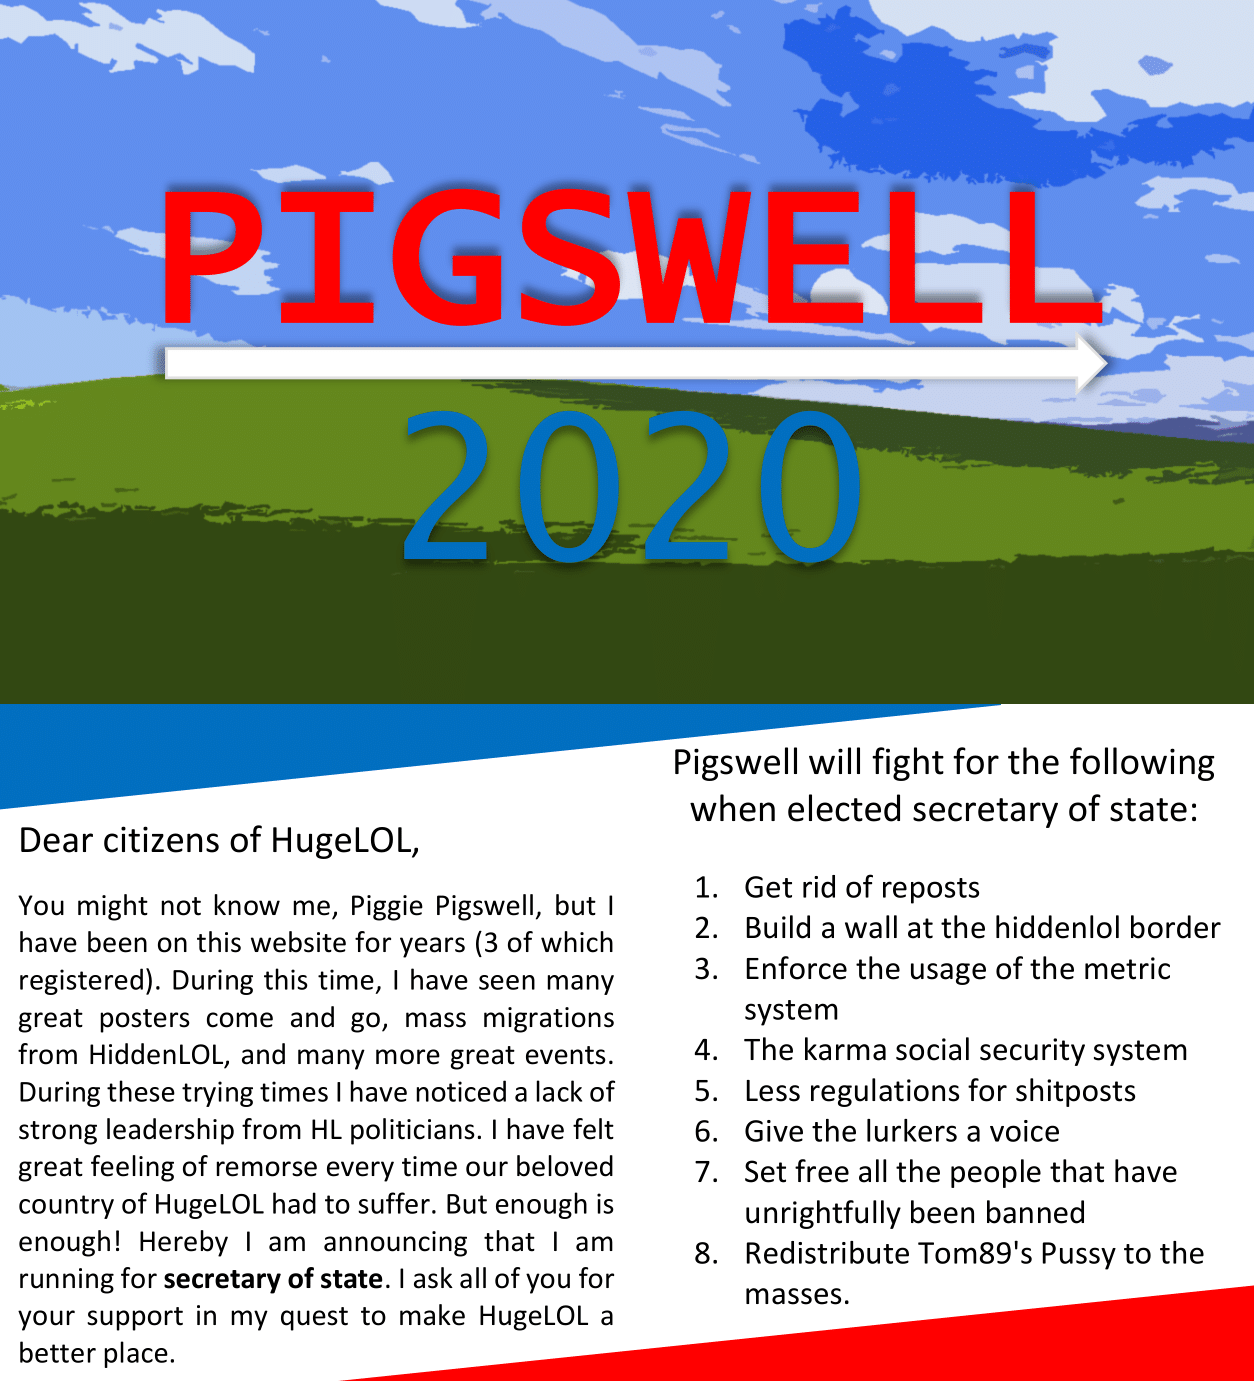 Pigswell 2020